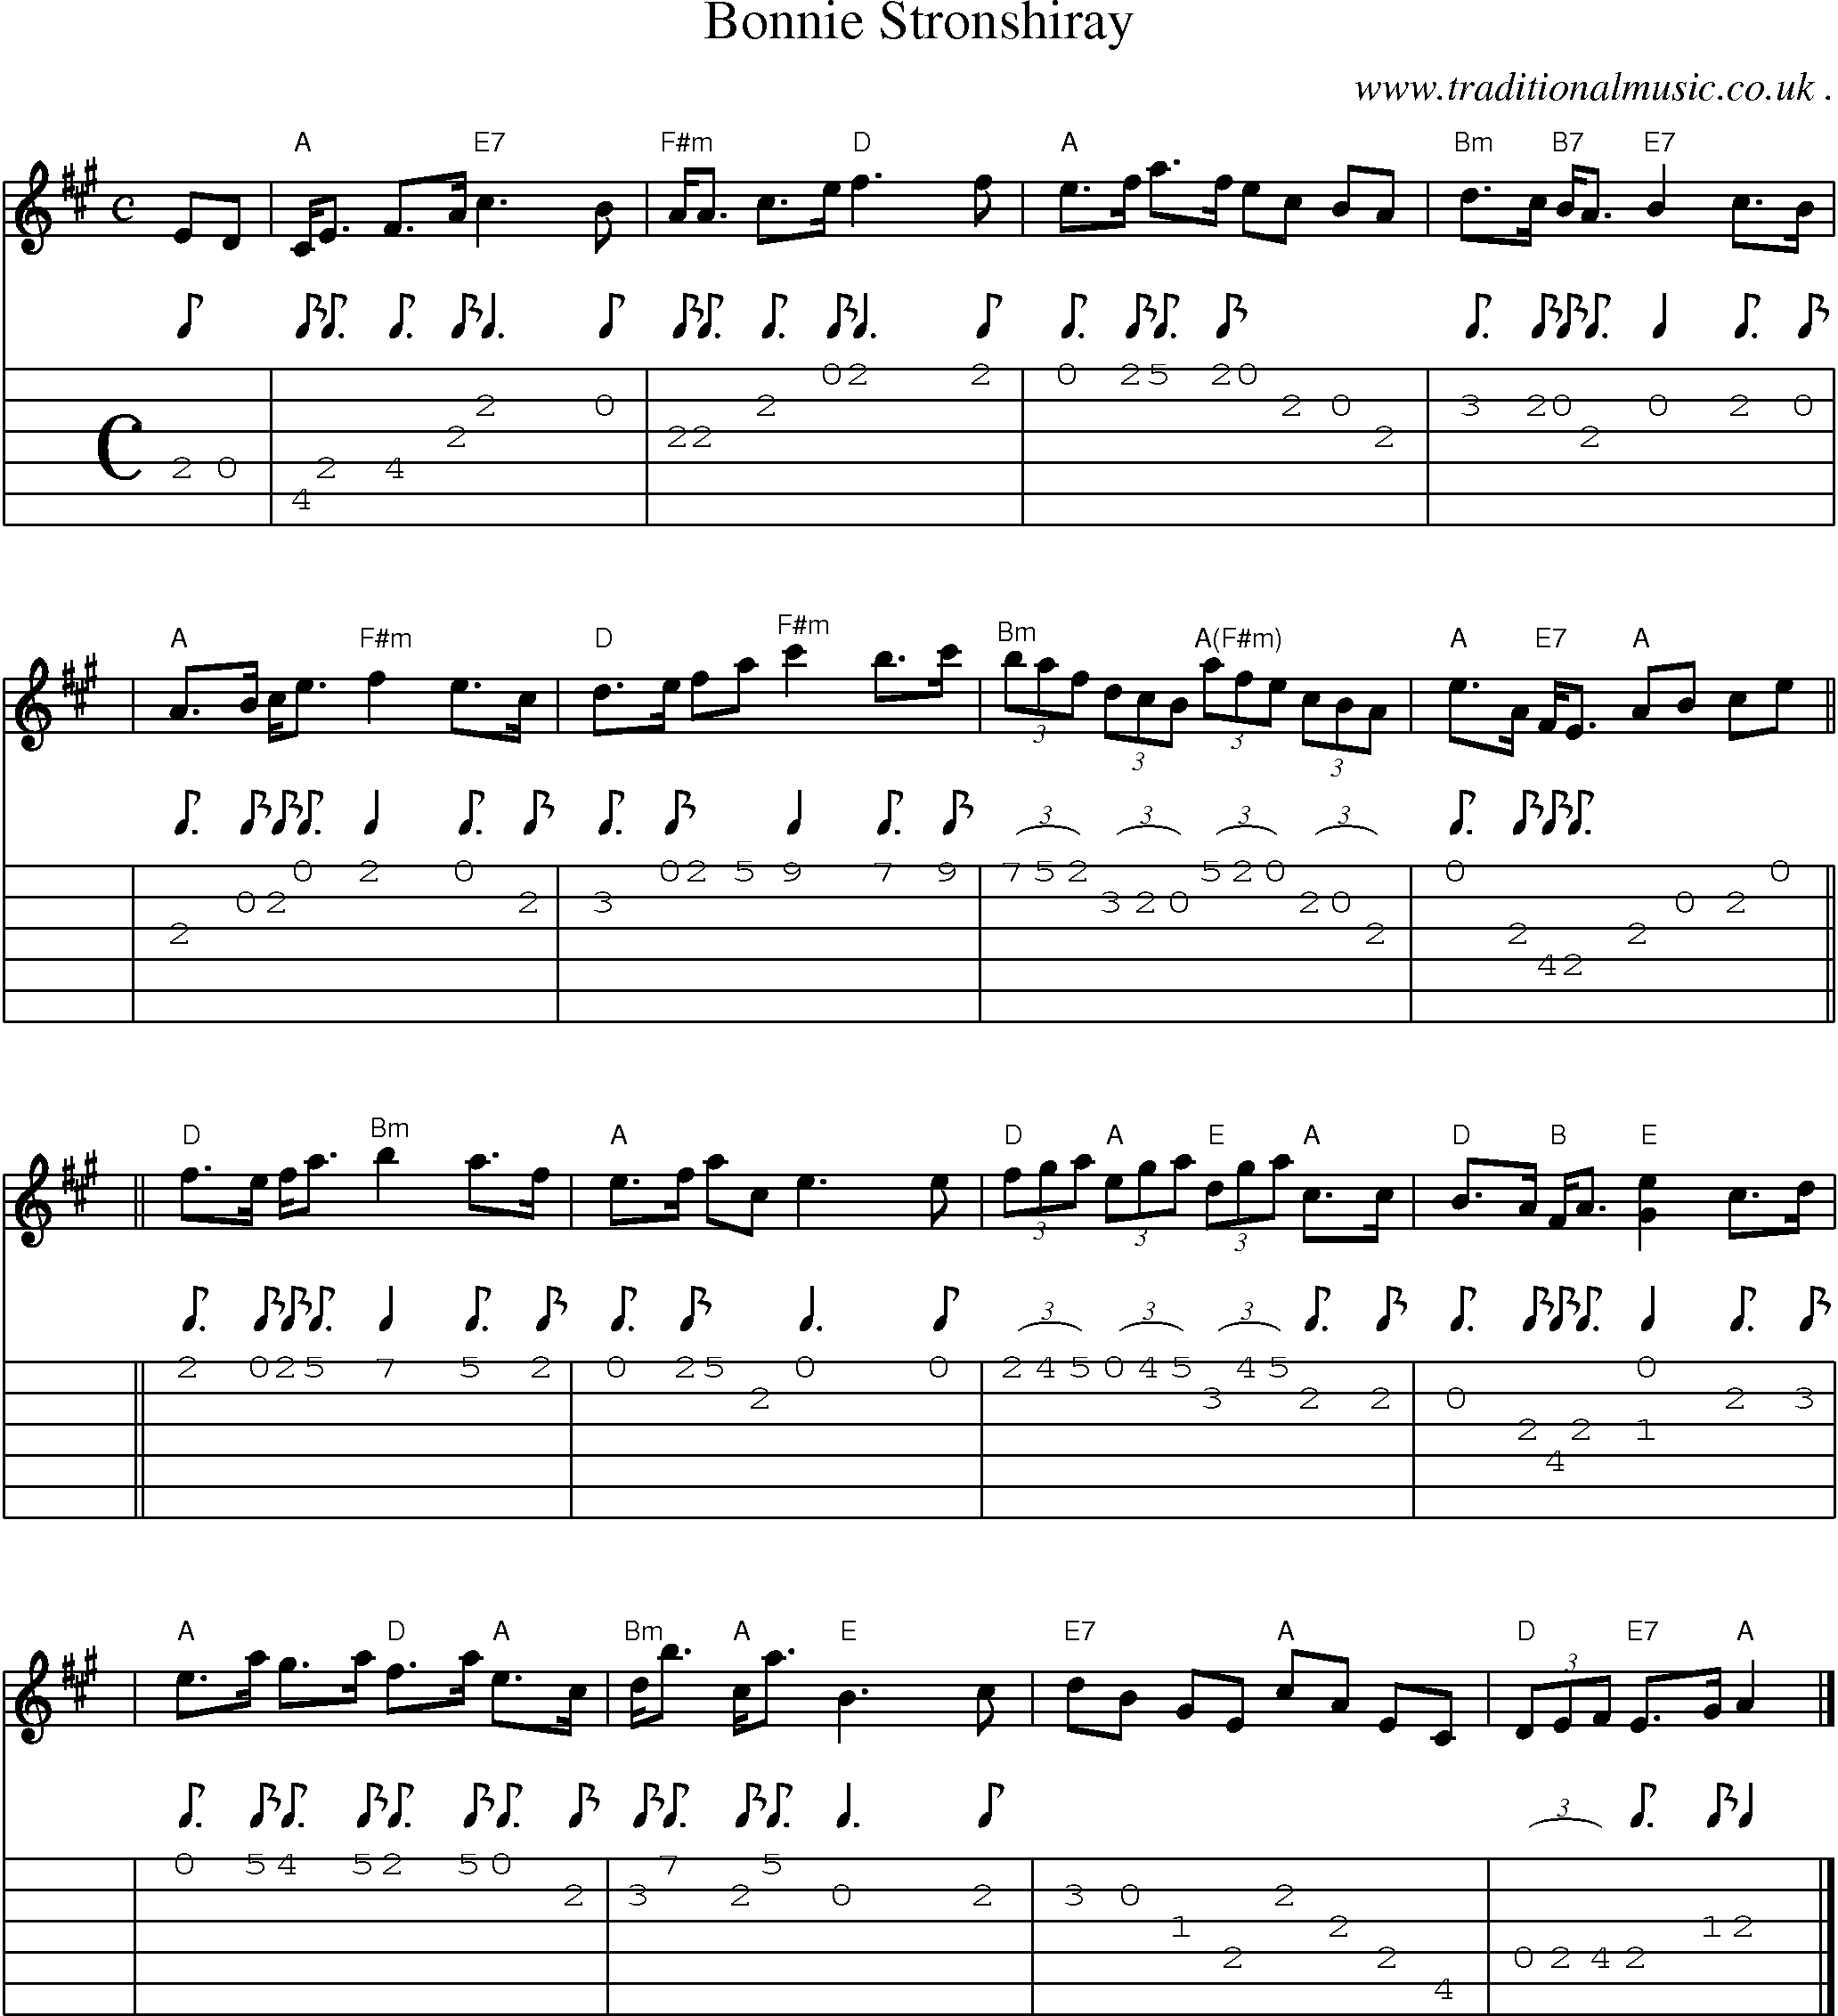 Sheet-music  score, Chords and Guitar Tabs for Bonnie Stronshiray